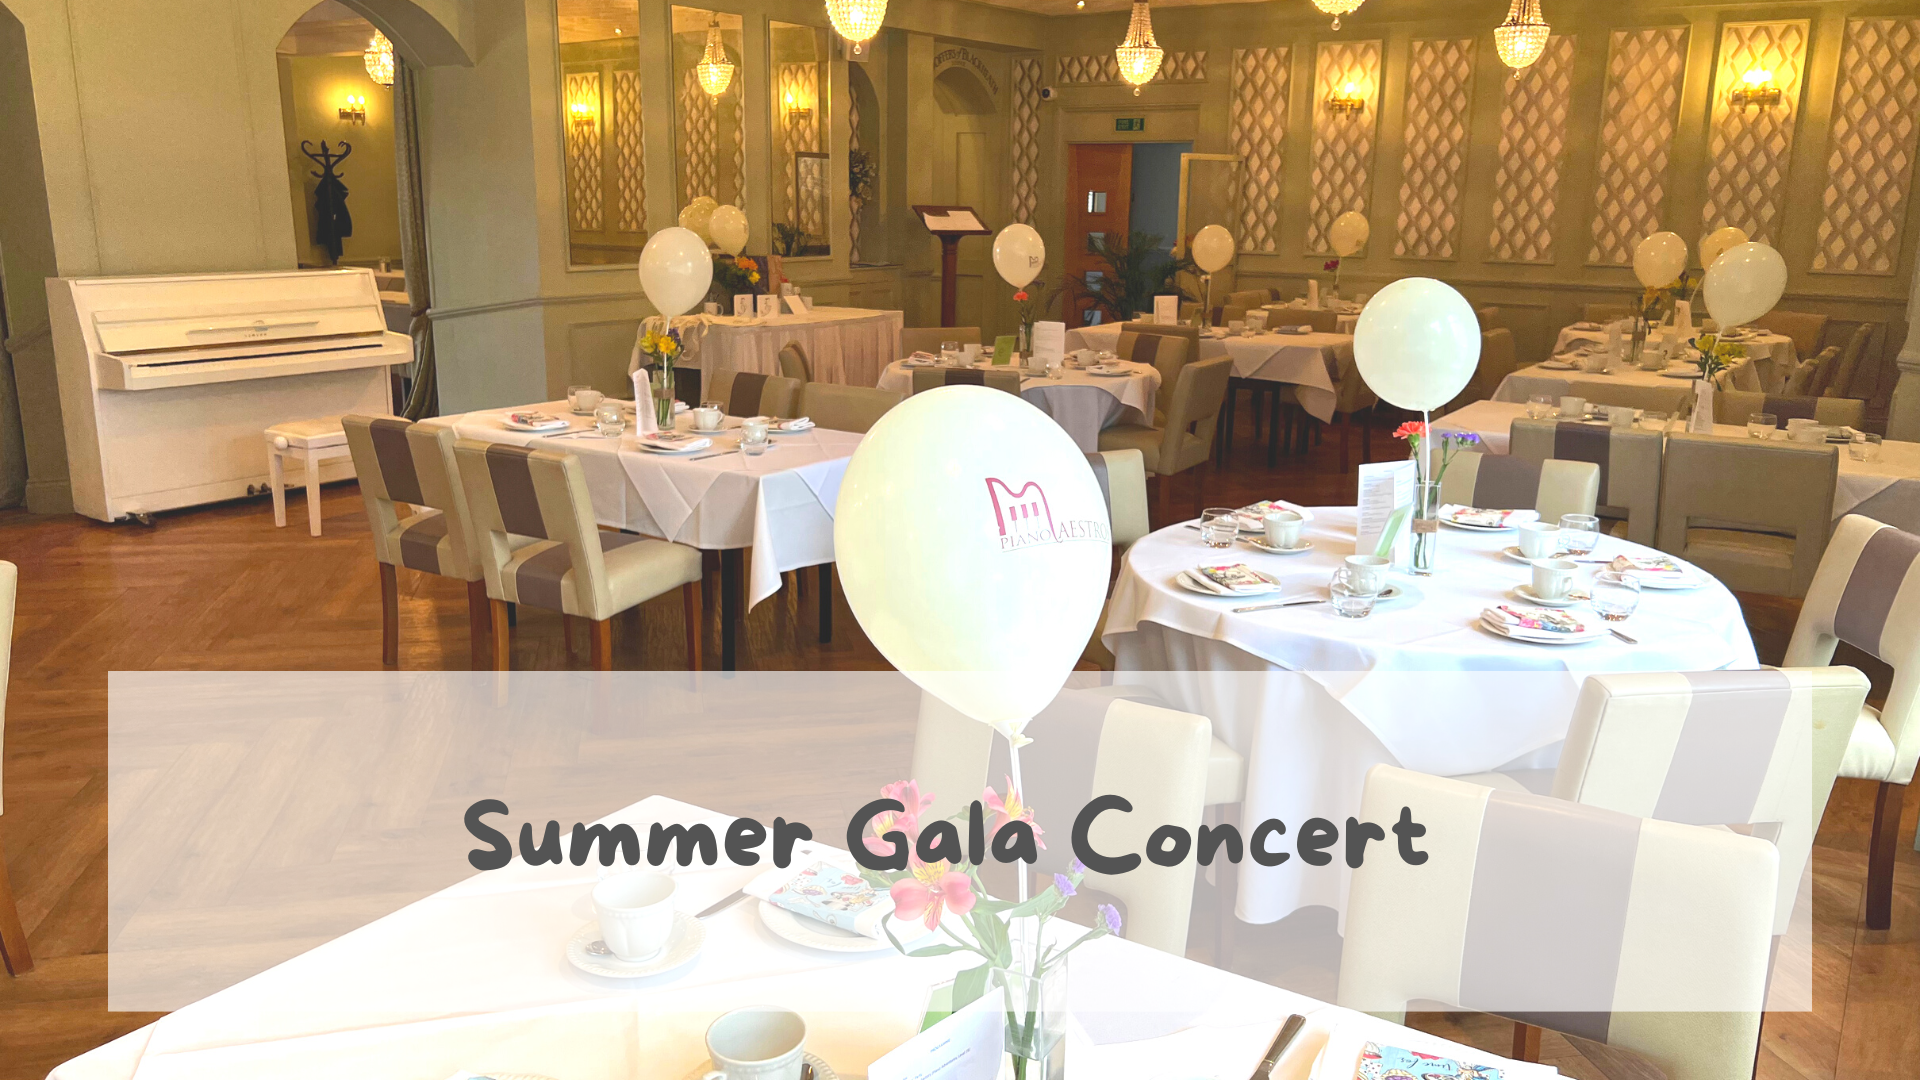 Summer Gala Concert with afternoon tea at The Clarendon Hotel Blackheath is one of the main highlights of the year for our students and their families.